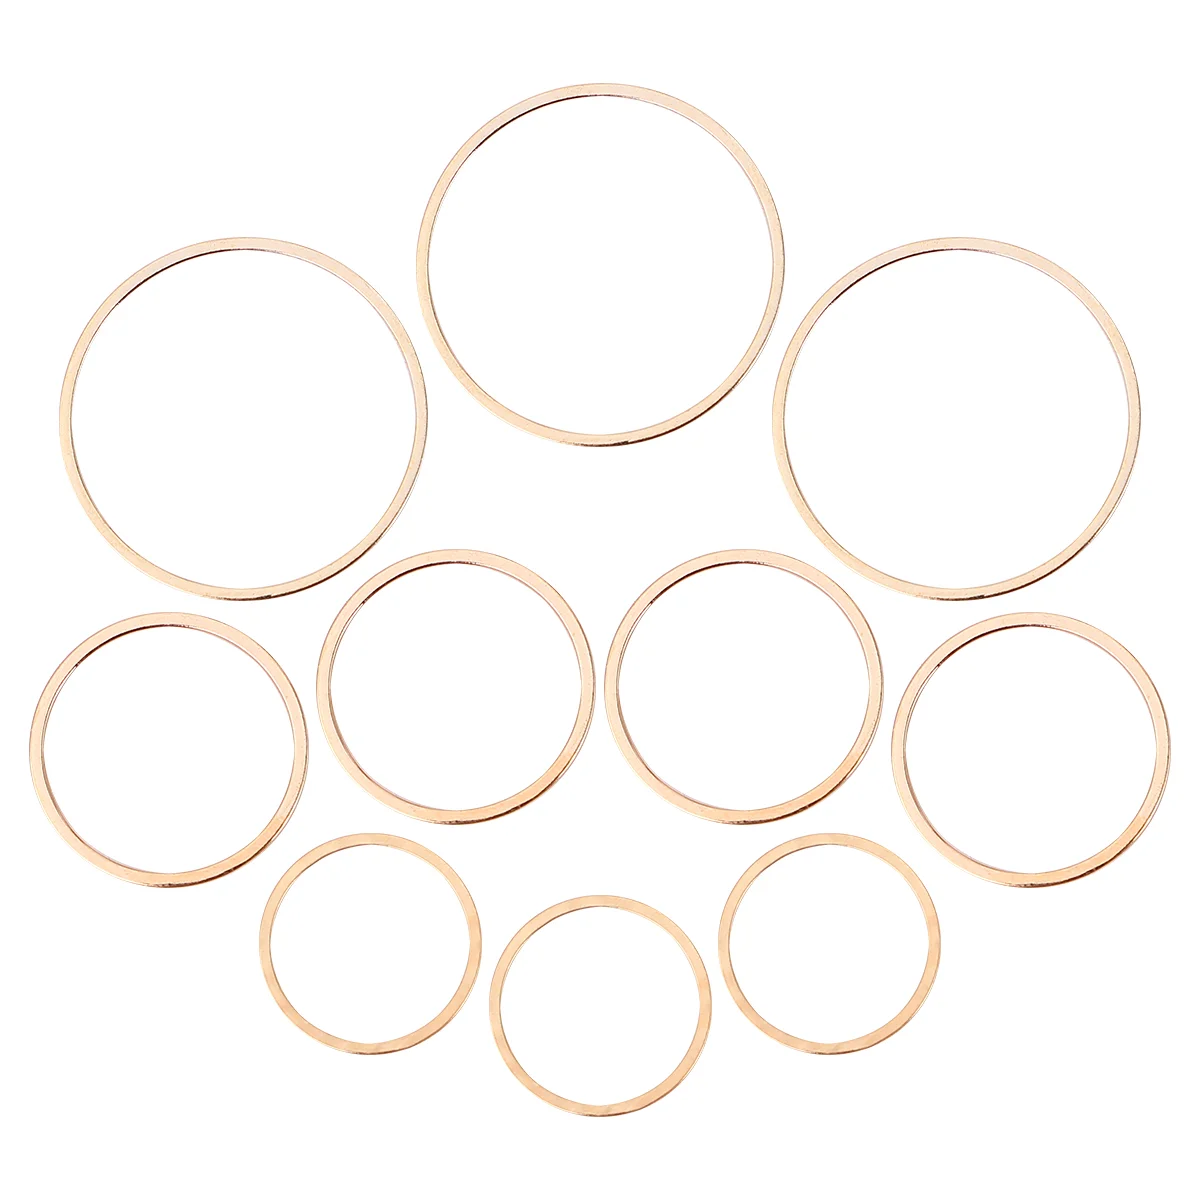 

60 Pcs Circle Earrings Dangle Hoop Pendant Bezel Jewelery Girl Copper Charm Round Picture Frame Linking Gold